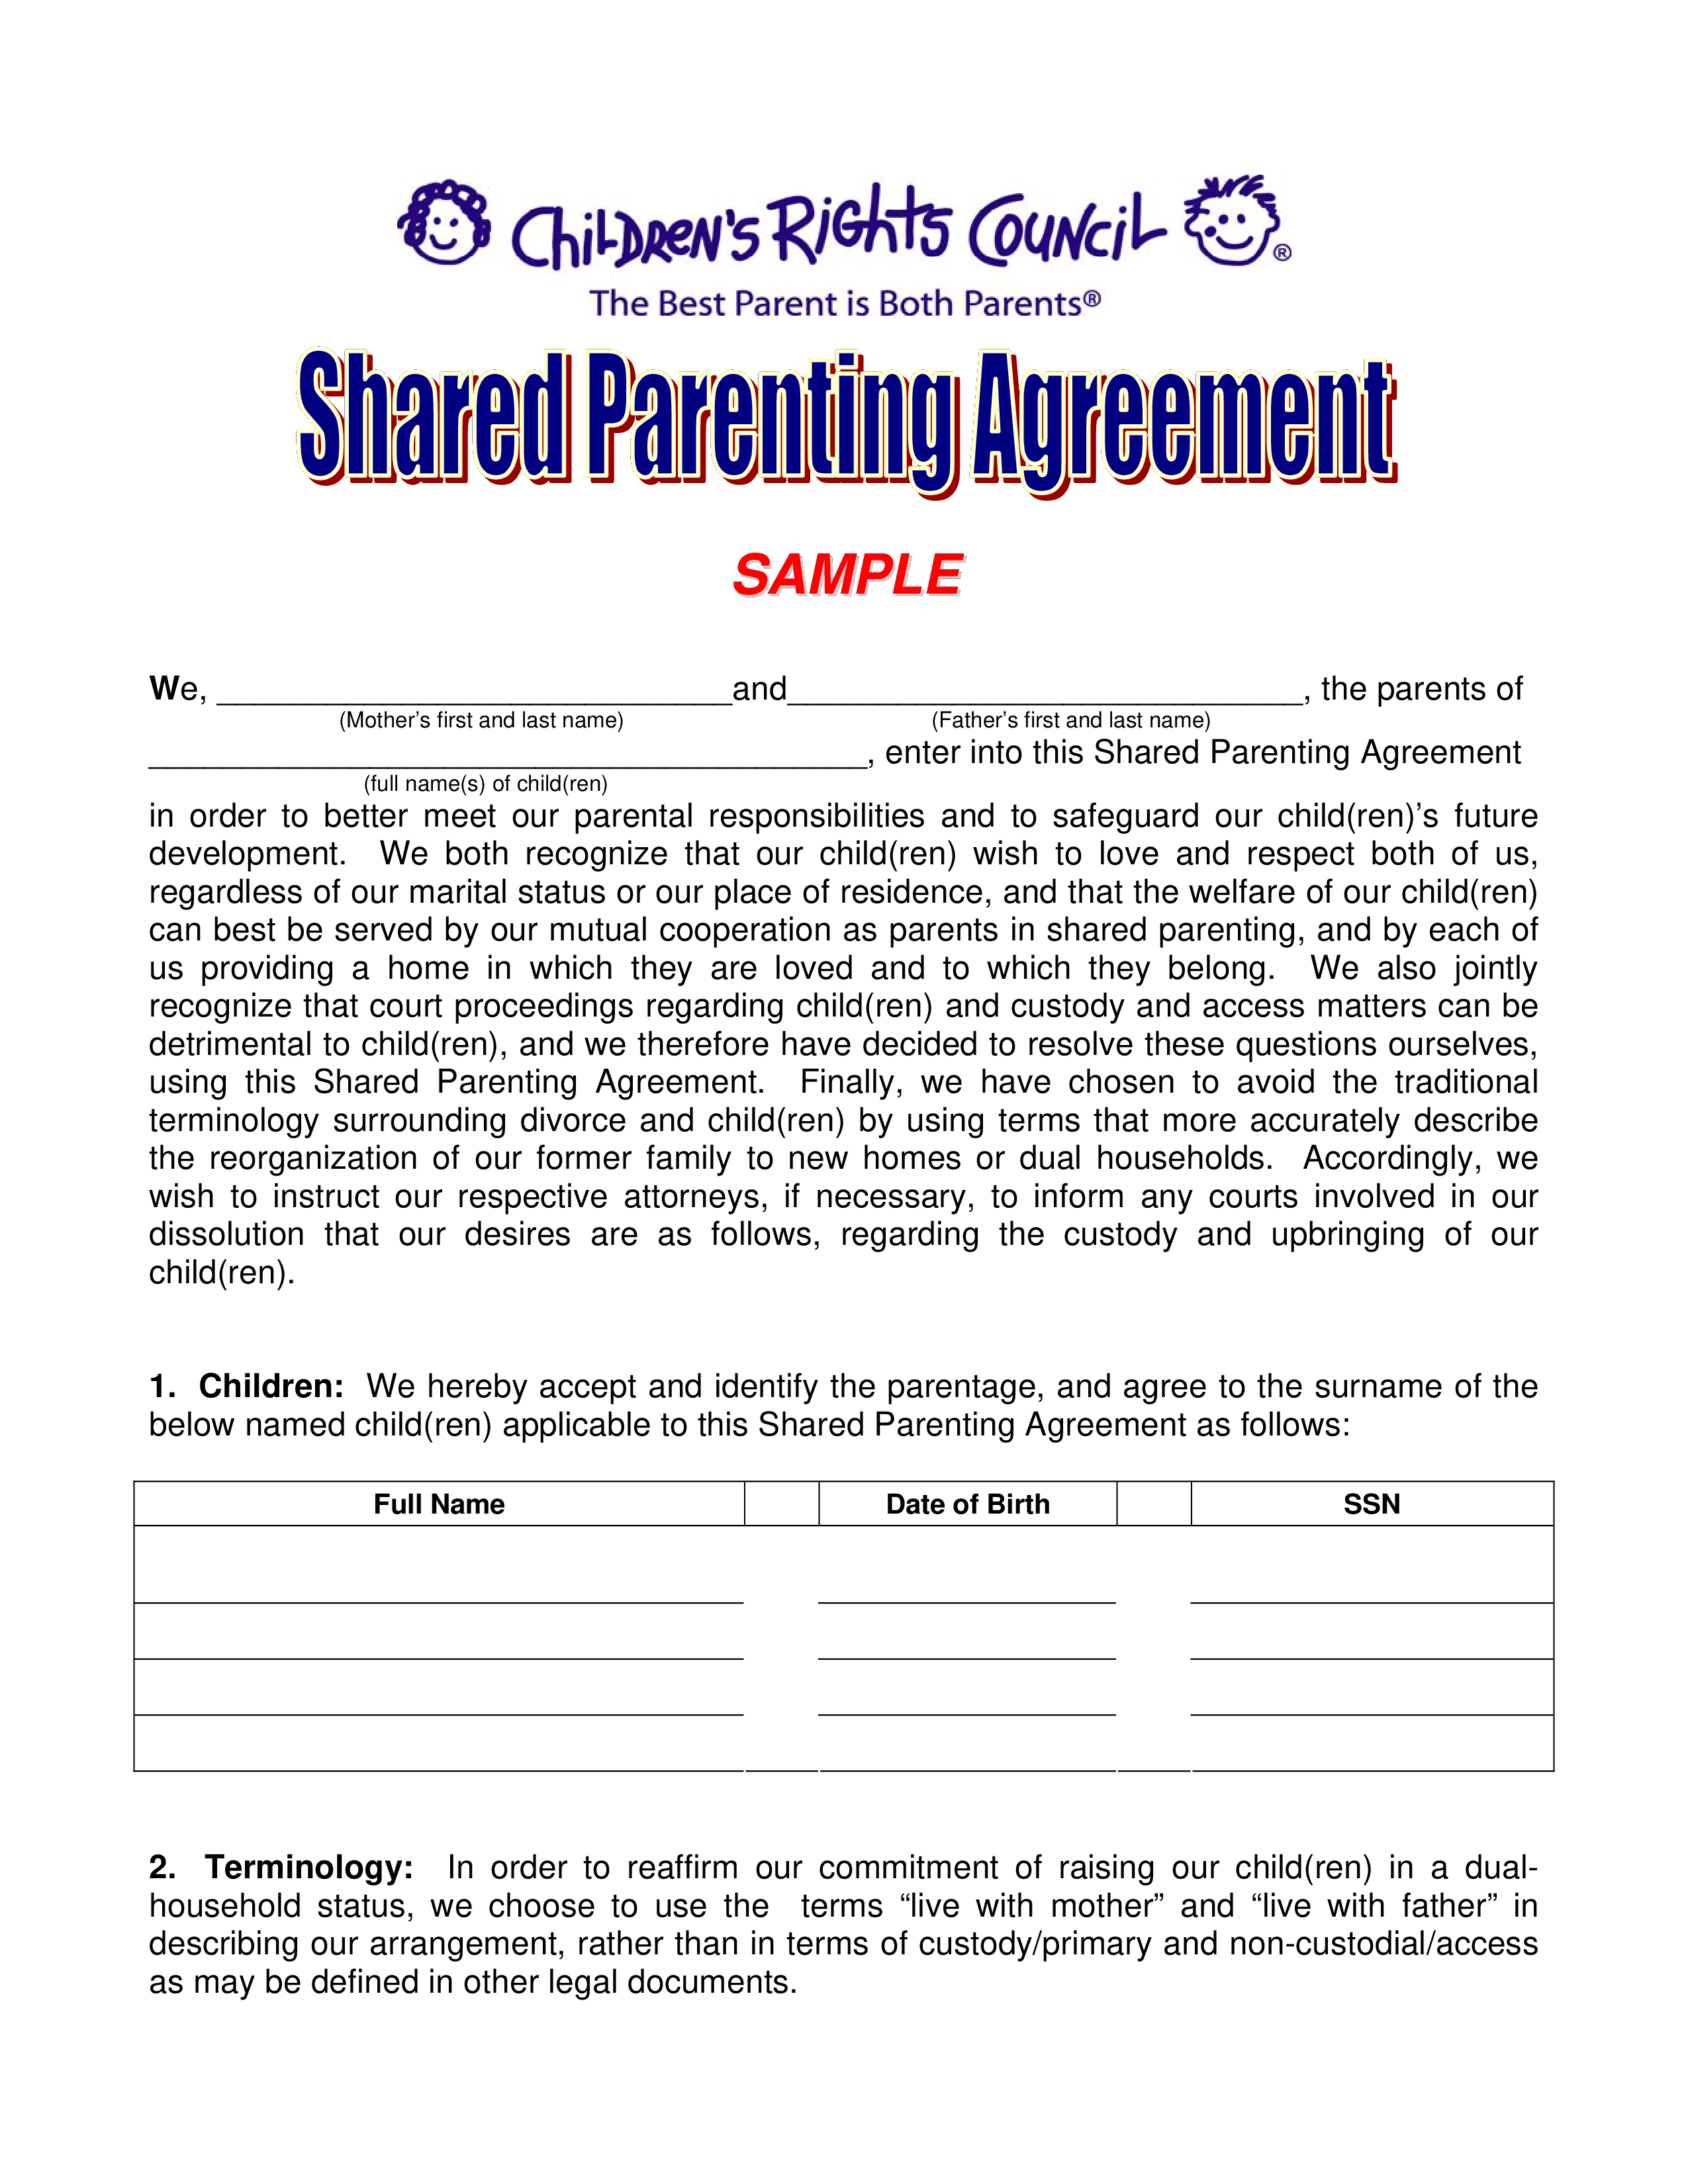 Free Shared Parenting Agreement | Templates at 